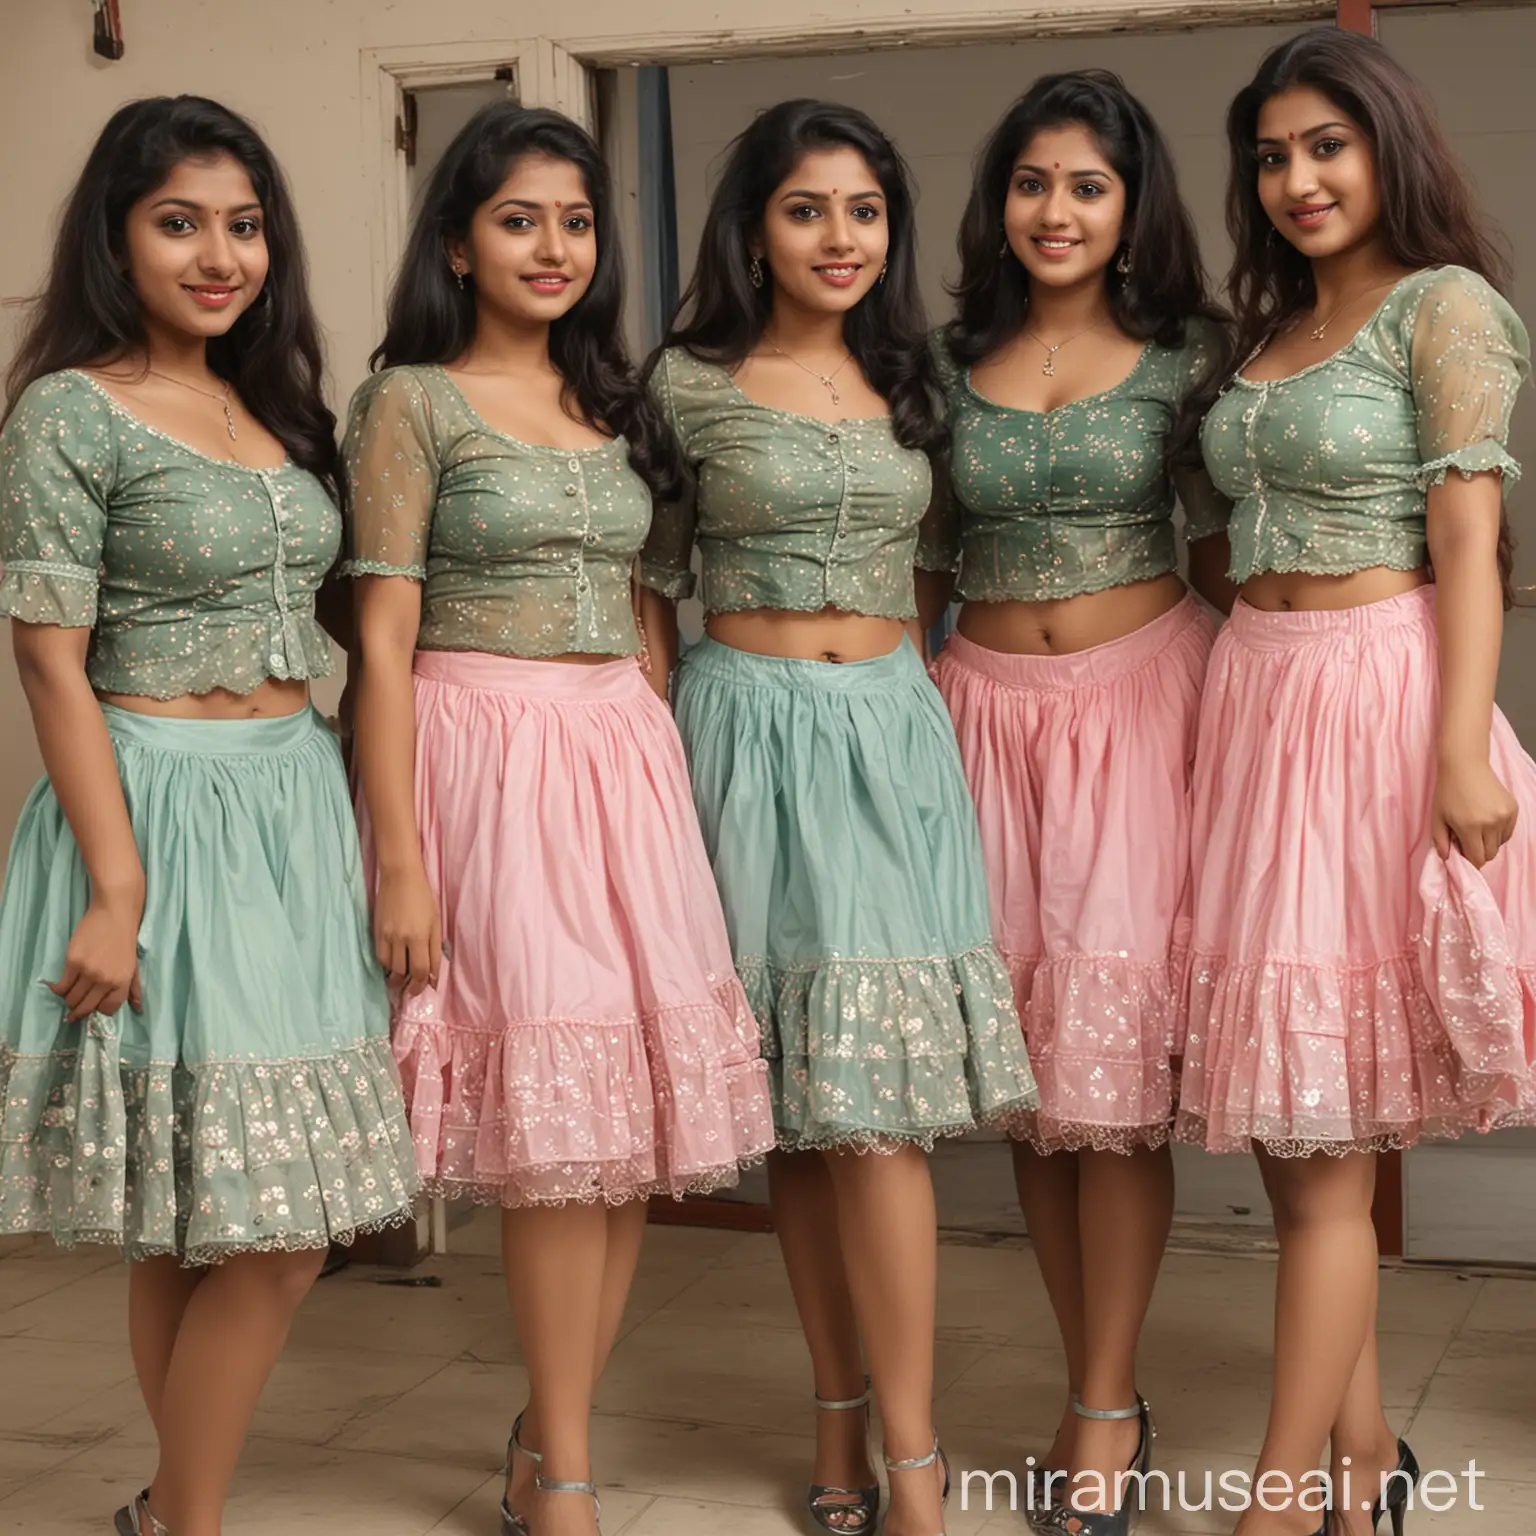 Stylish Indian Women in Traditional Blouse and Petticoat Ensemble